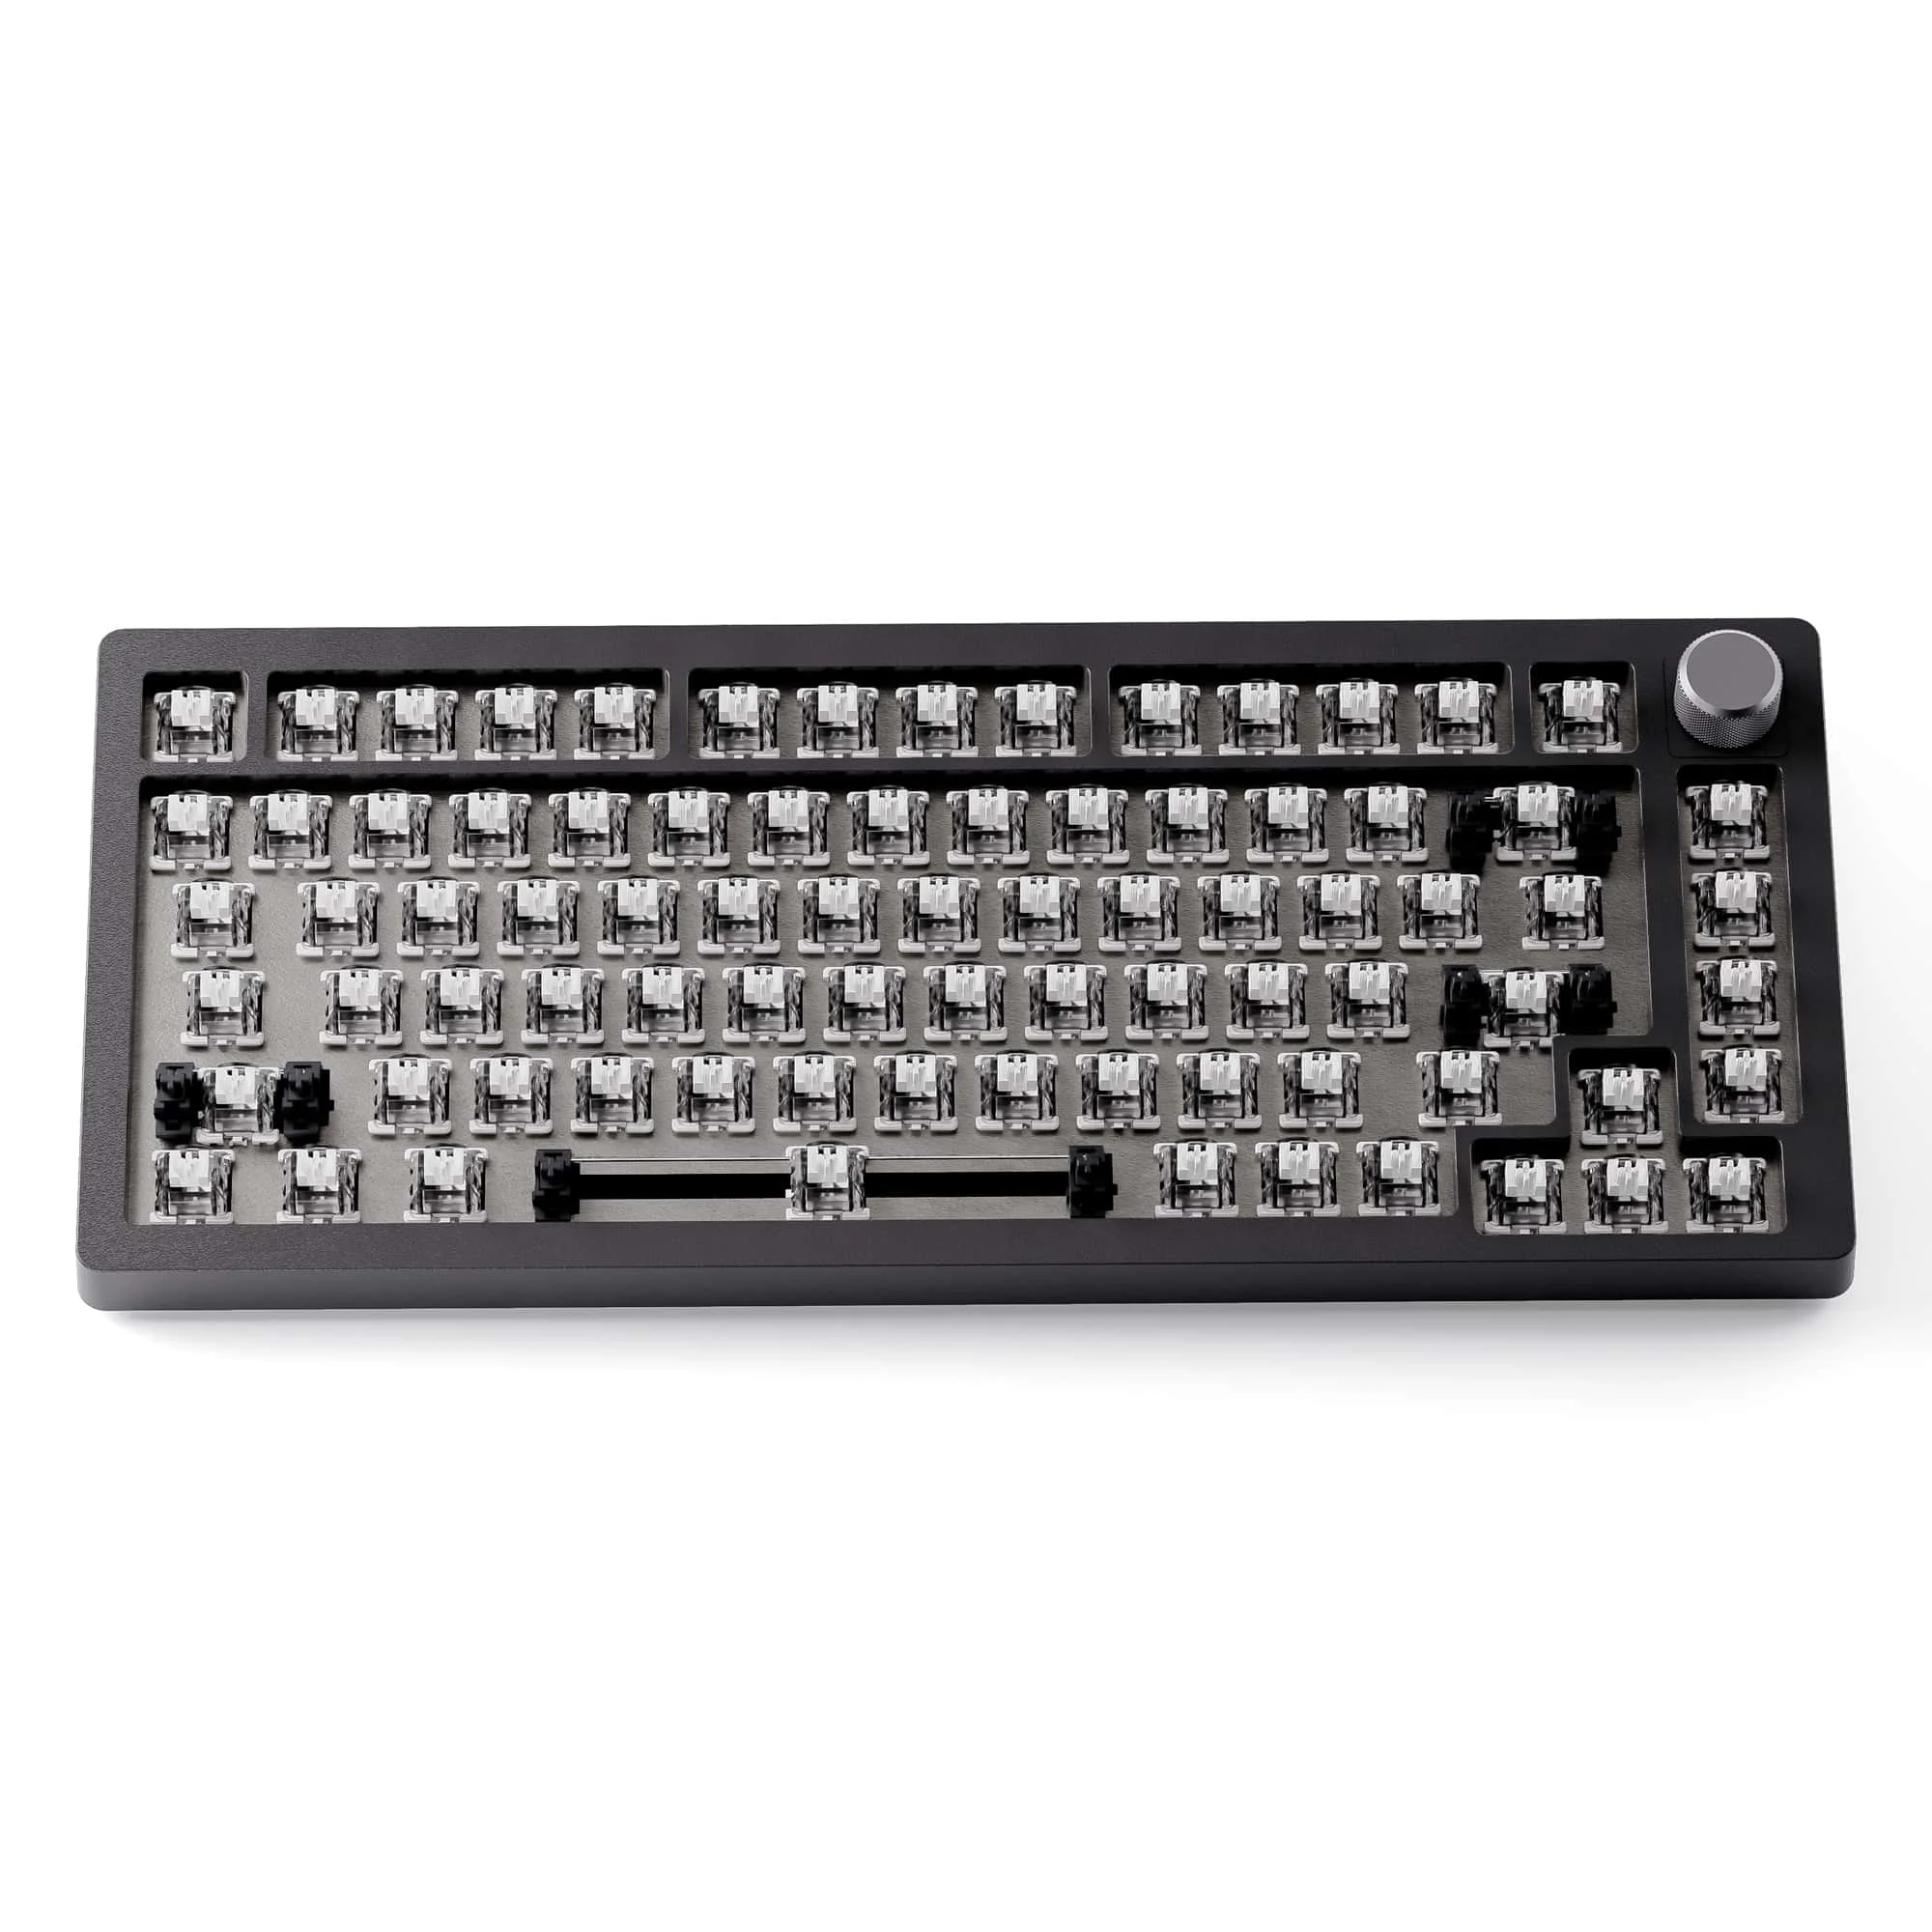 Drunkdeer A75 - Wired Actuation-distance-adjustable Magnetic Switch Gaming  Mechanical Keyboard - Buy Keyboard Switches,Game Mechanical